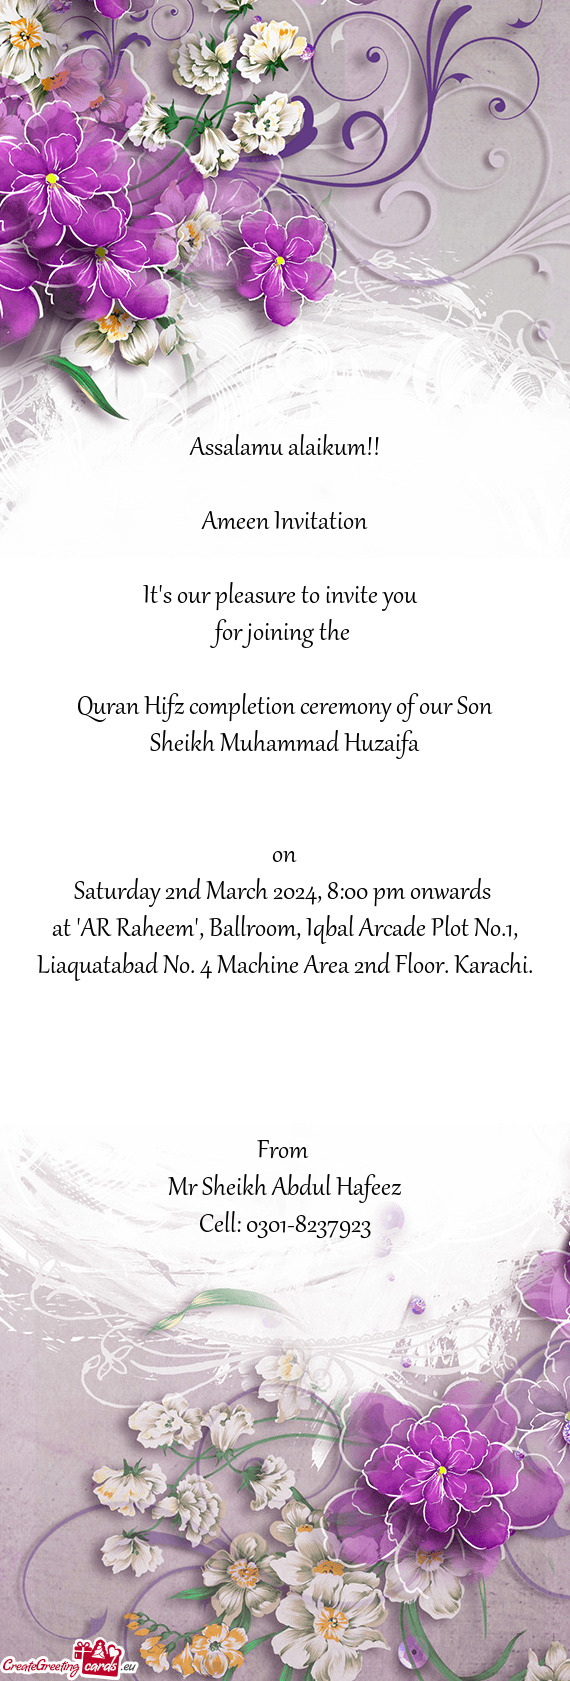 Quran Hifz completion ceremony of our Son